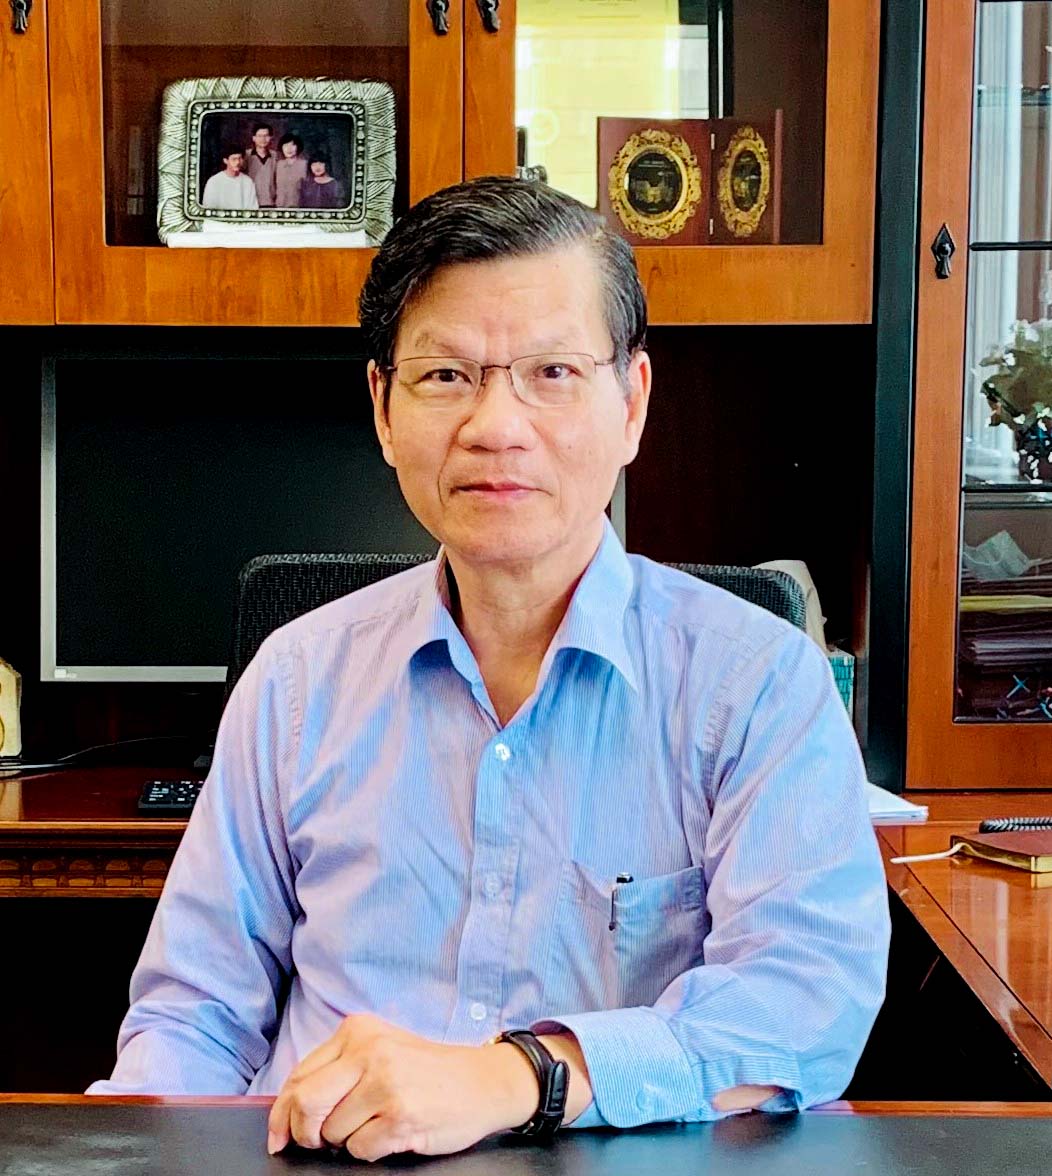 Congratulations to Prof. Chi-Huey Wong ‒ First Glycoscientist Receives 2021 Welch Award in Chemistry